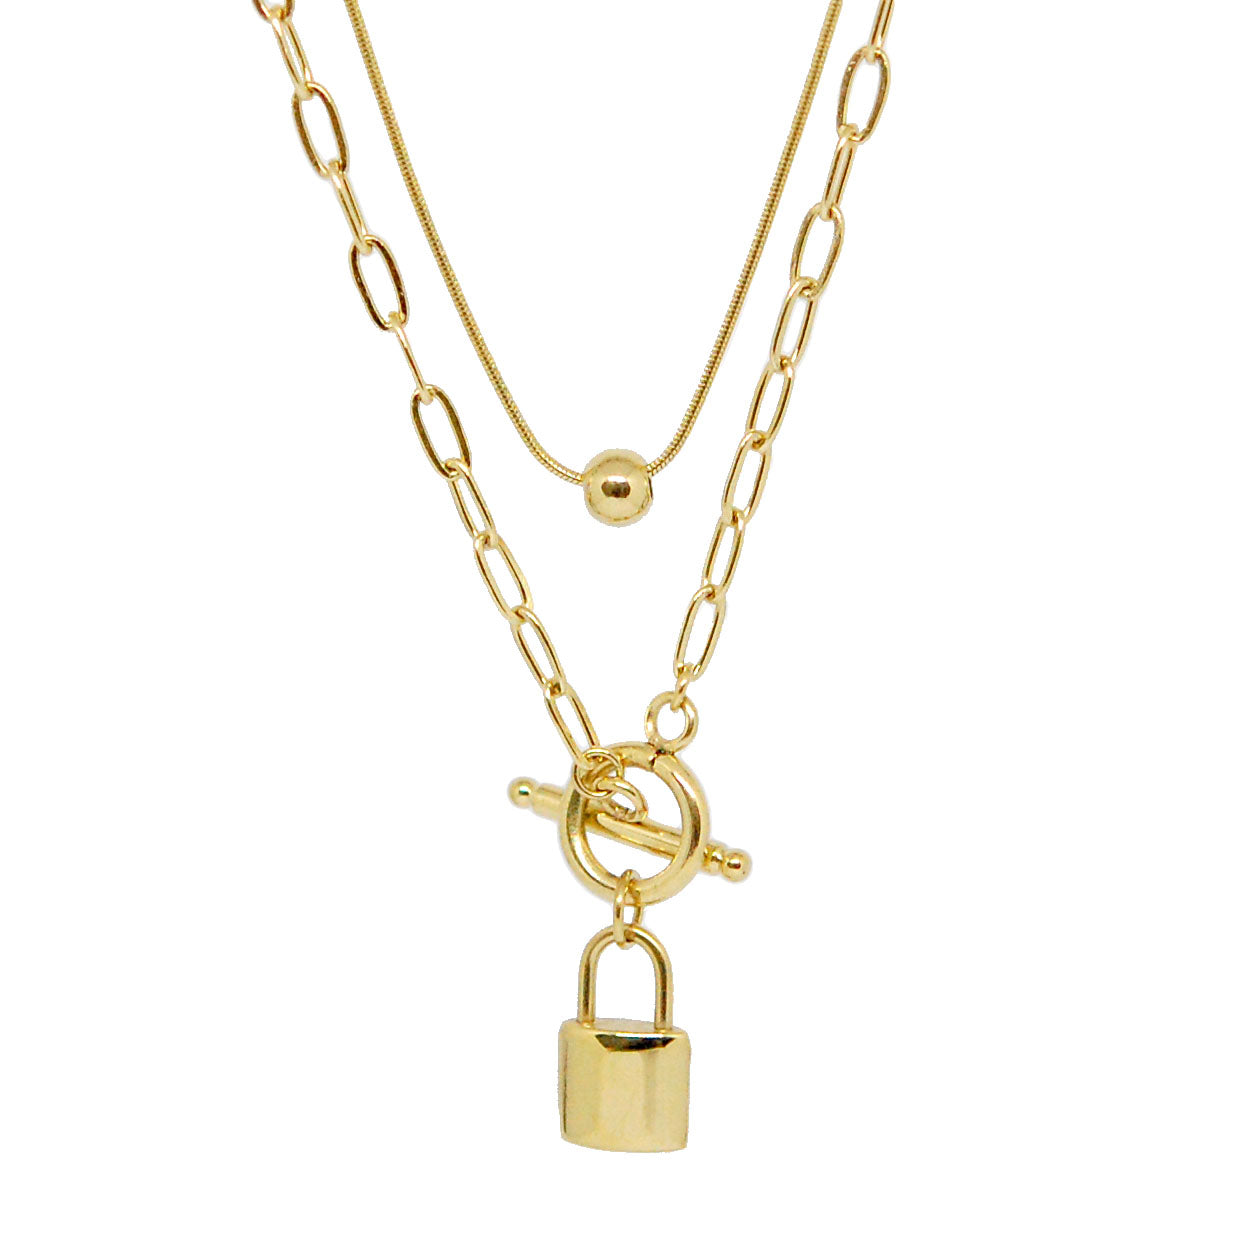 ESN 8037: All IPG Double (Snake Chain w/ Ball & Paperclip Ch w/ Lock) Necklace